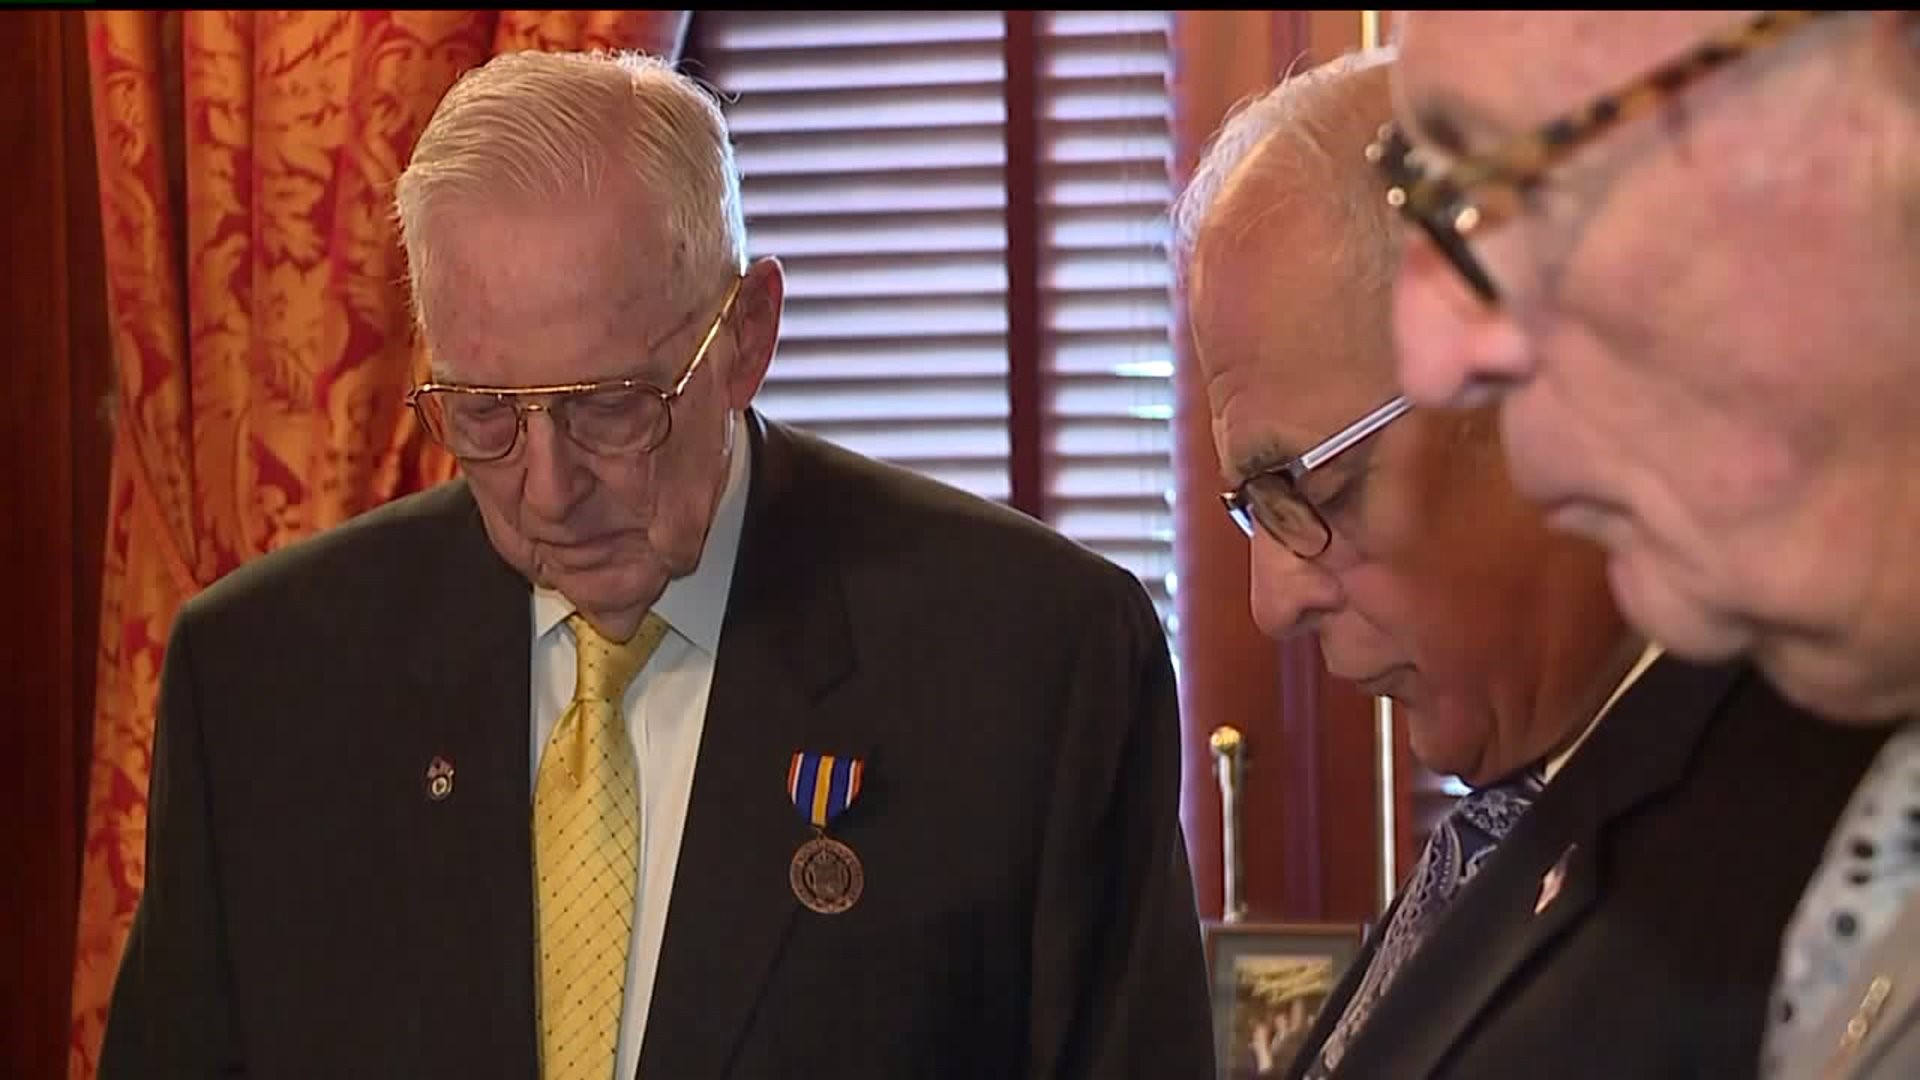 Two civilians leaders receive military honor